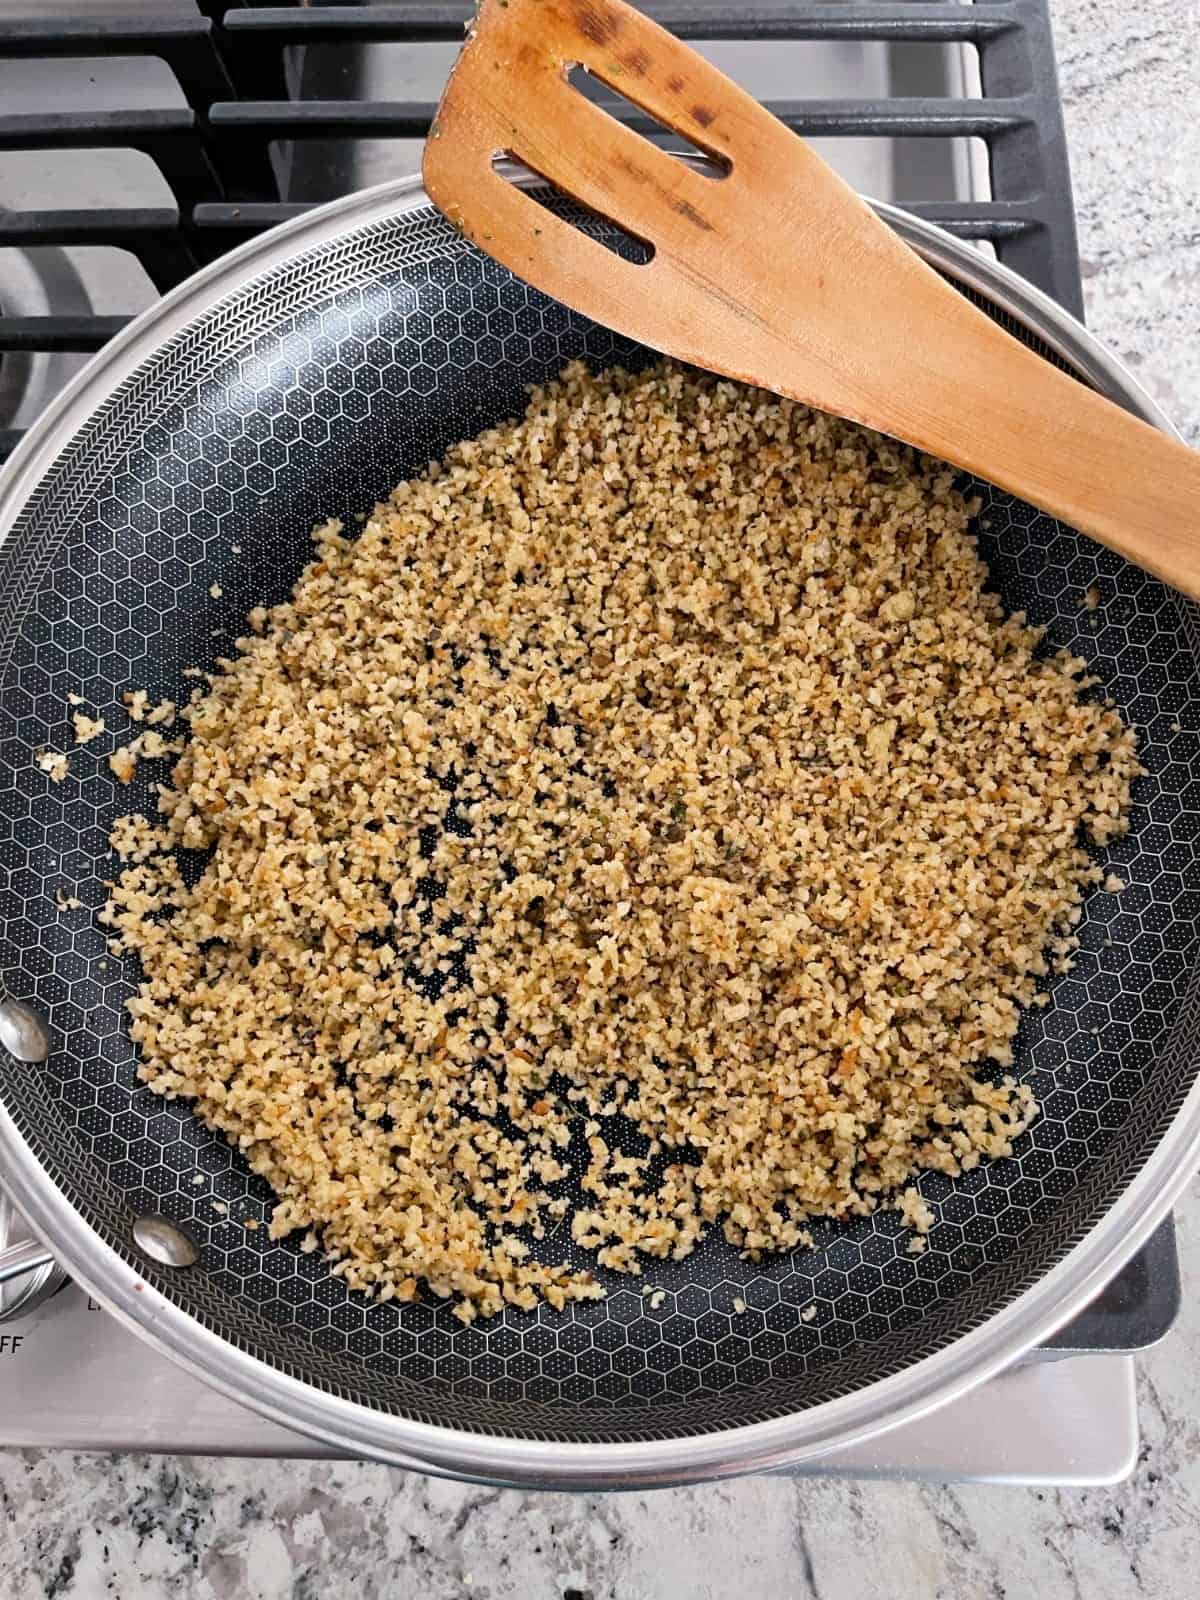 Toasting panko bread crumbs in butter in skillet on stove top.